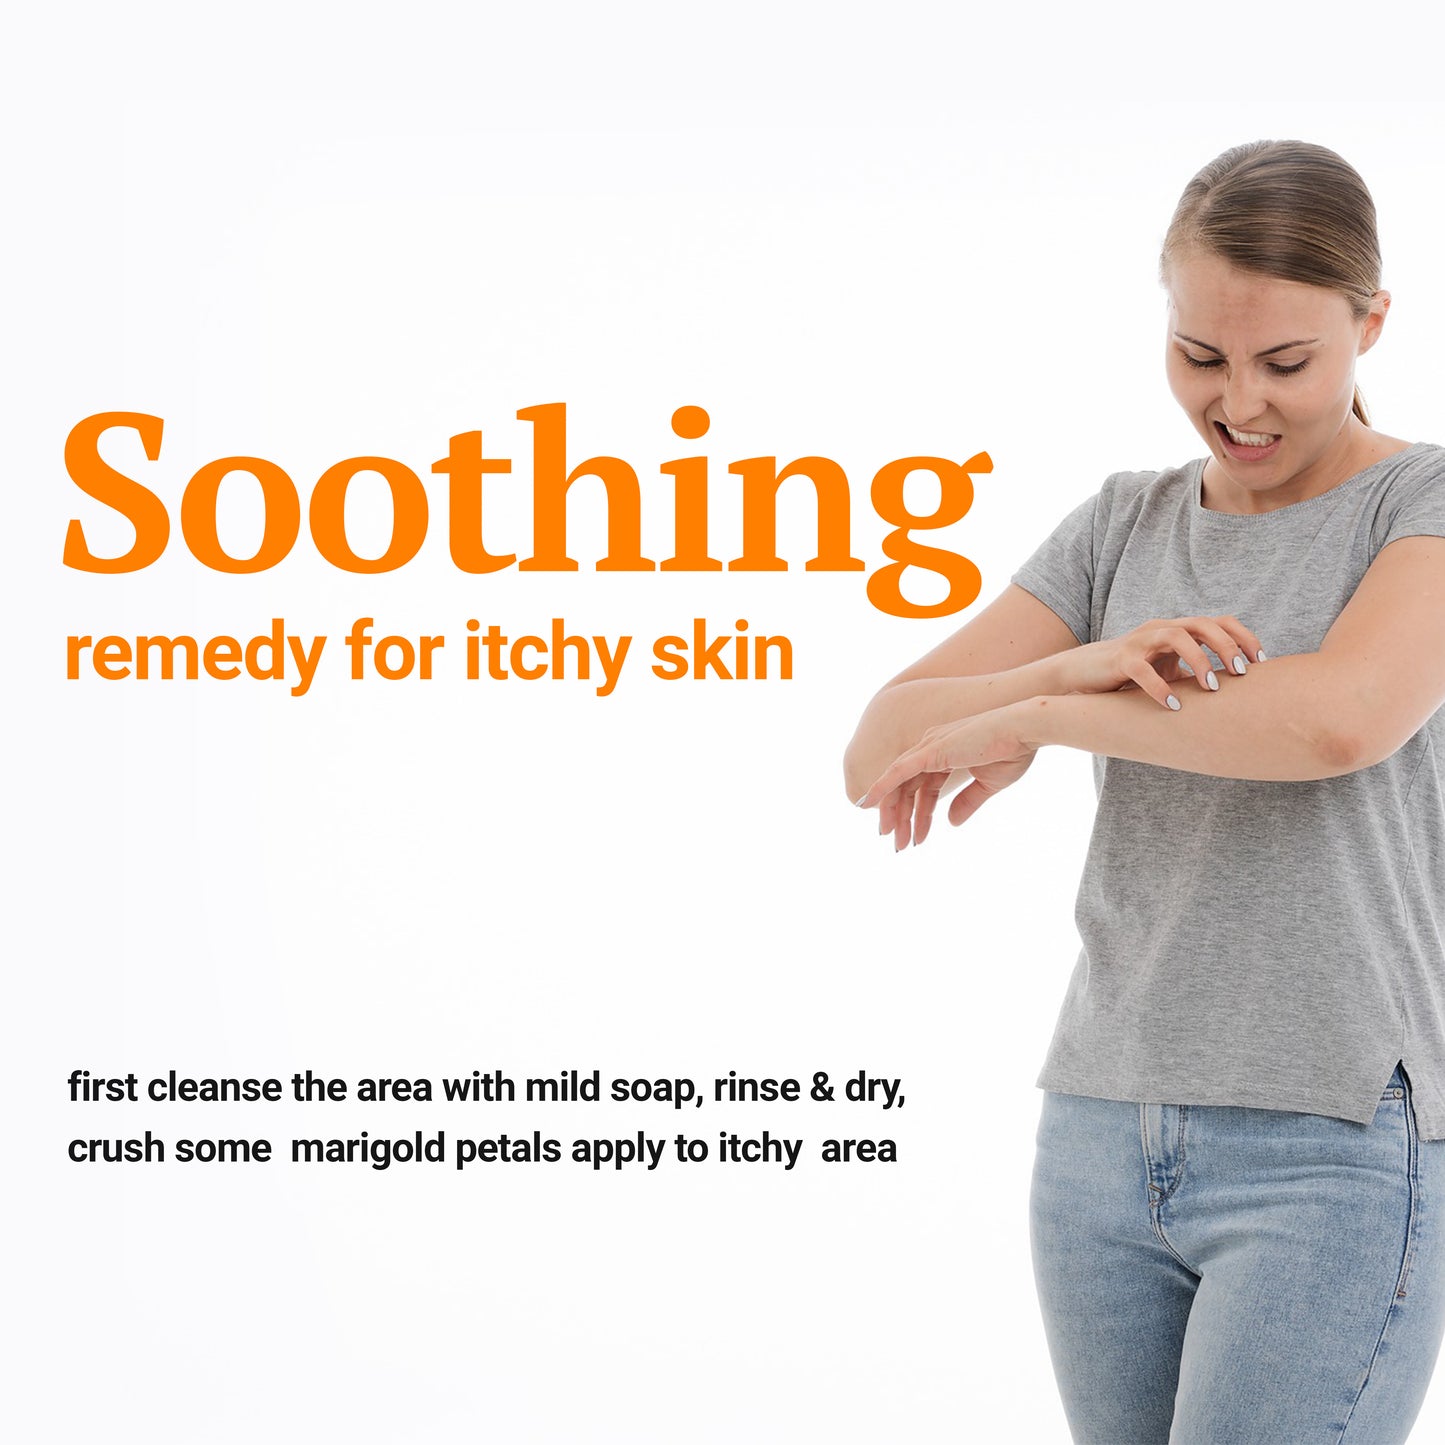 
                  
                    soothing remedy for itchy skin - first cleanse the area with mild soap, rinse & dry, crush some marigold petals apply to itchy area
                  
                